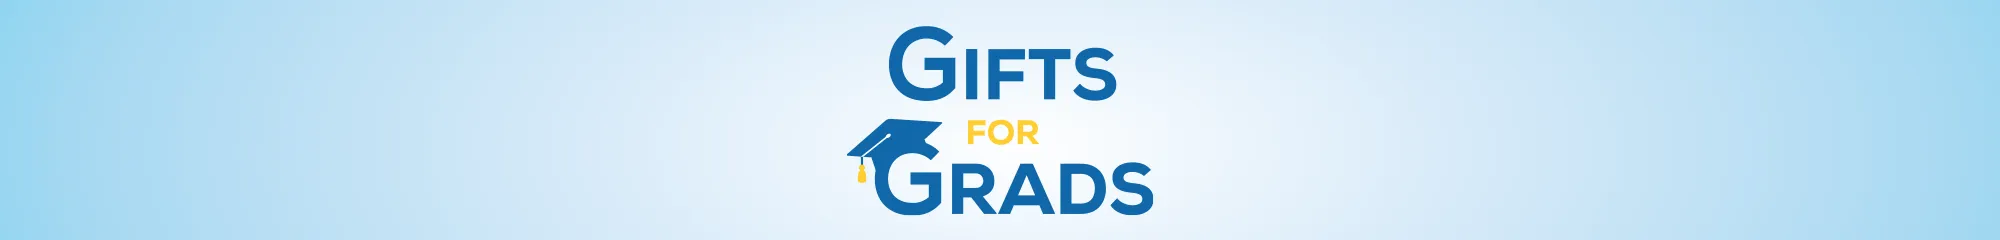 Grads gift guide for the next adventure